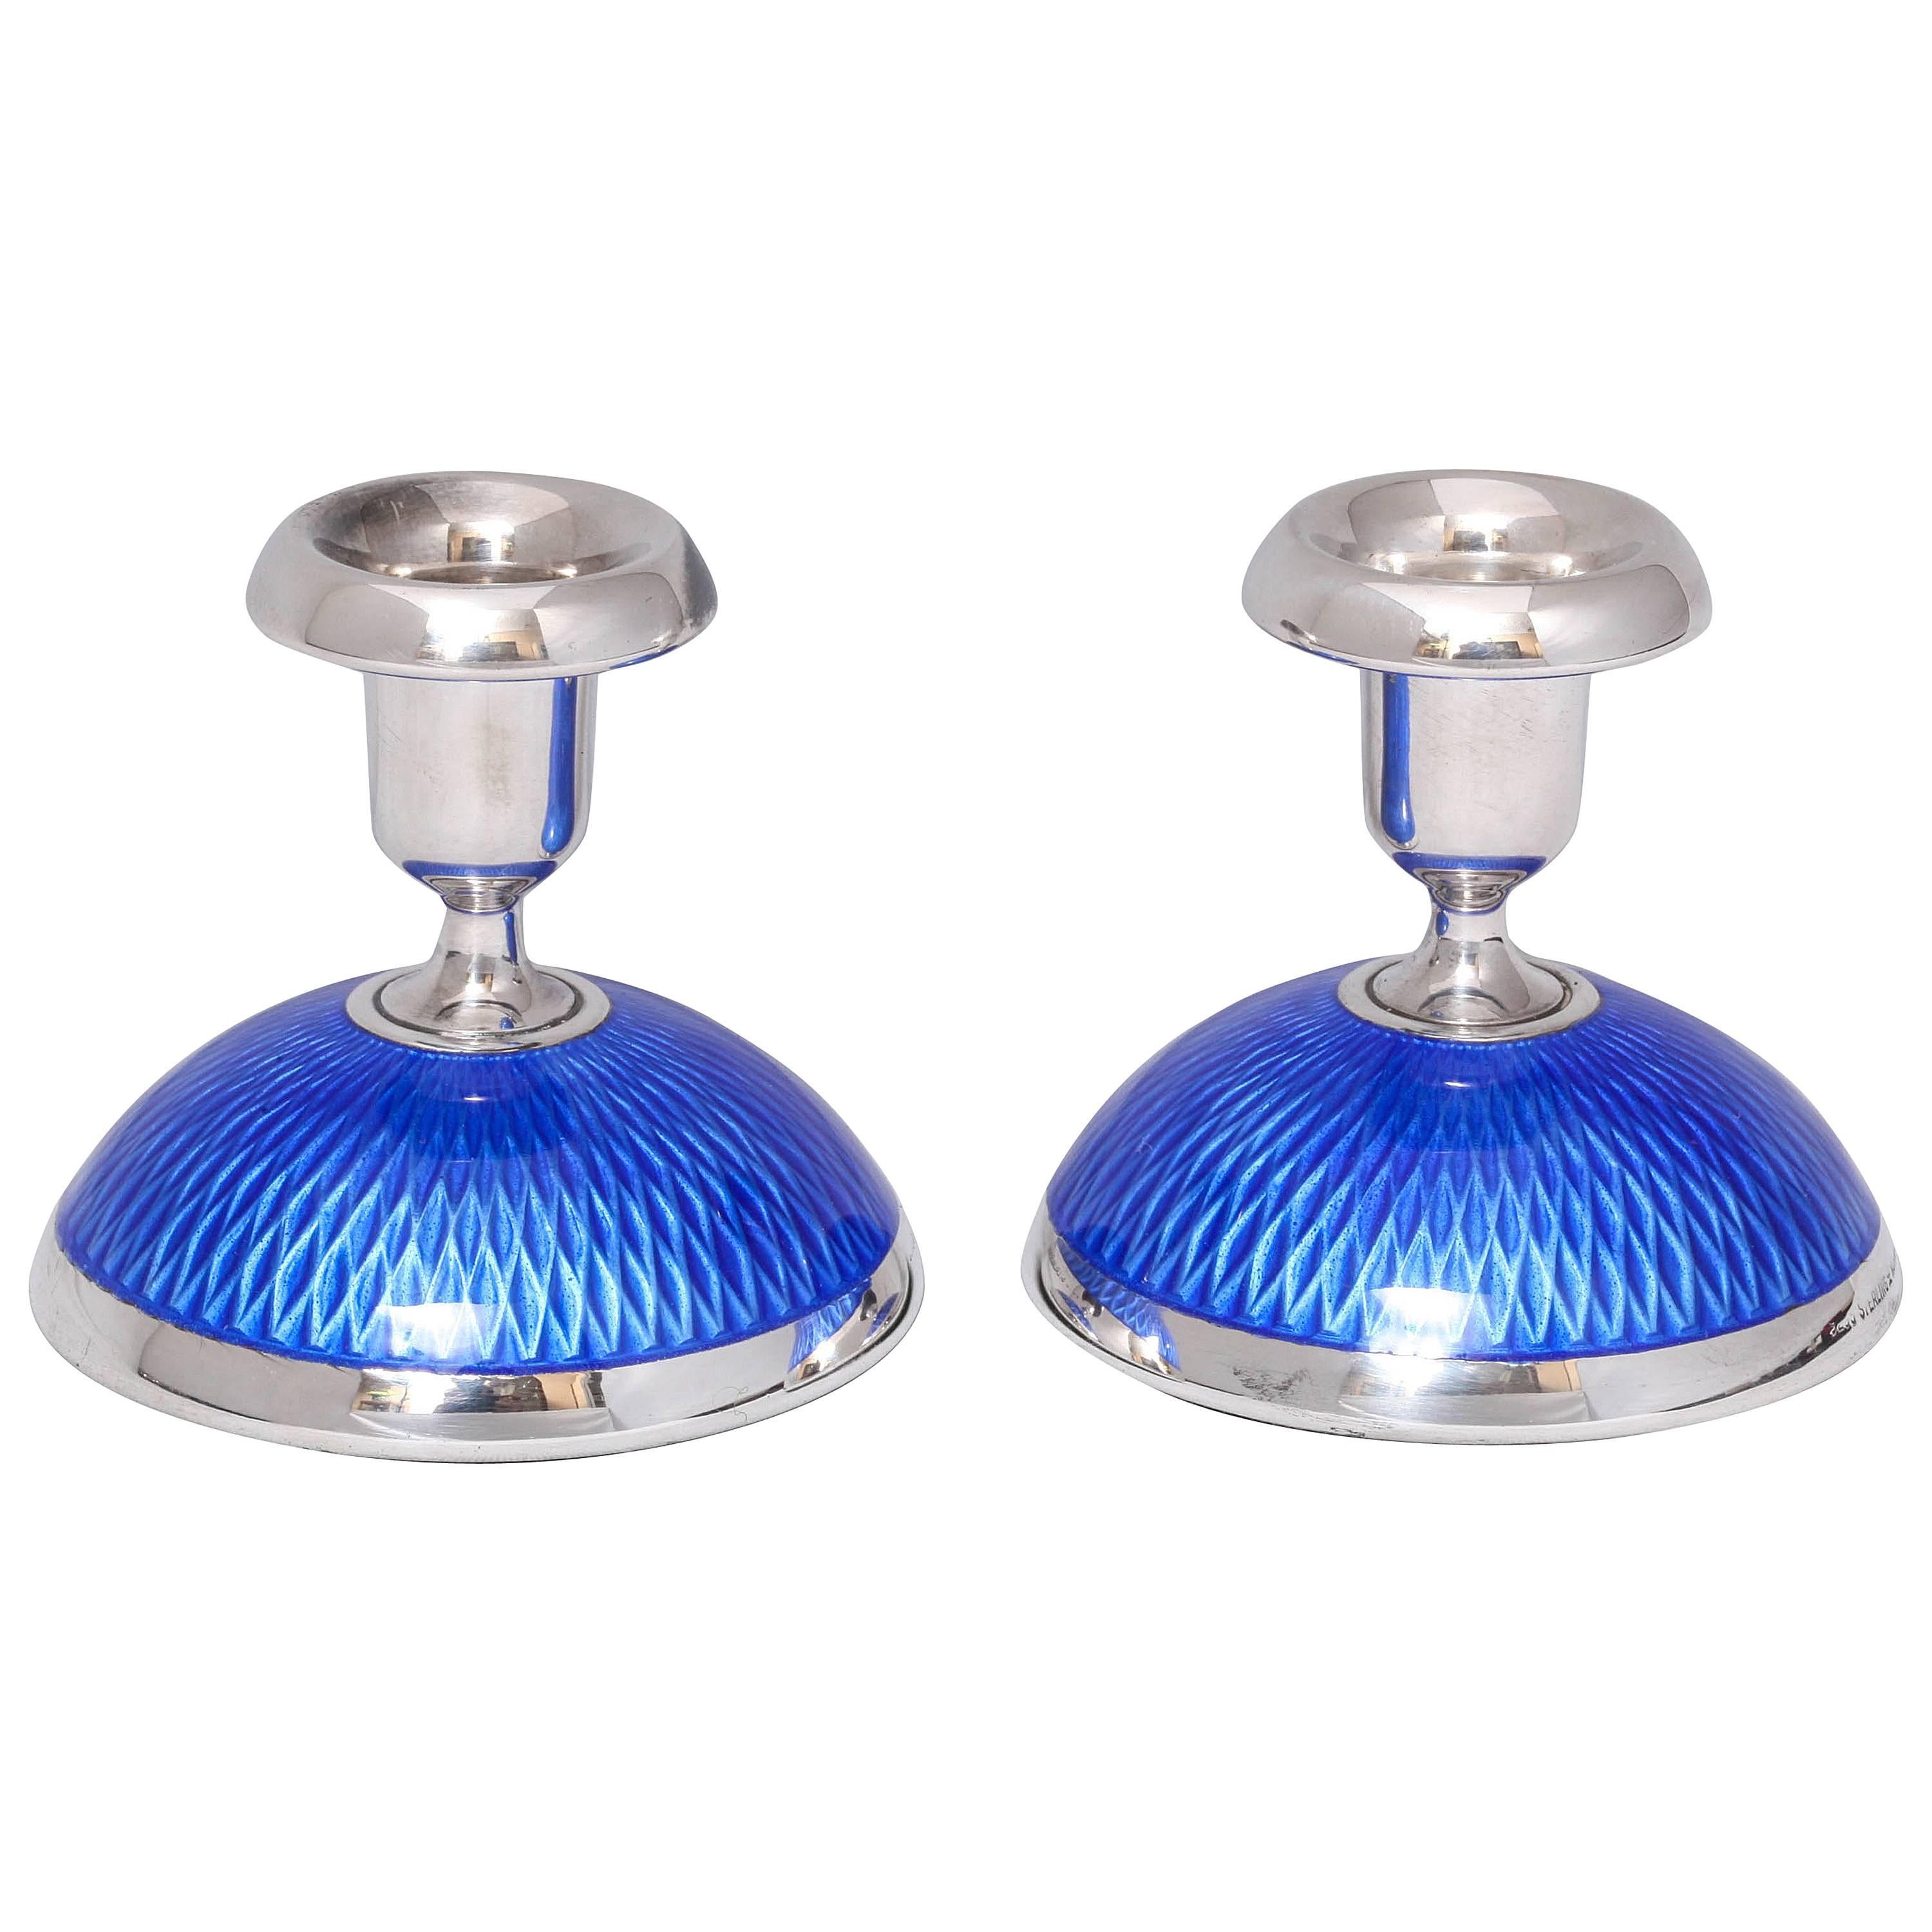 Pair of Art Deco Sterling Silver and Guilloche Enamel Andersen Candlesticks